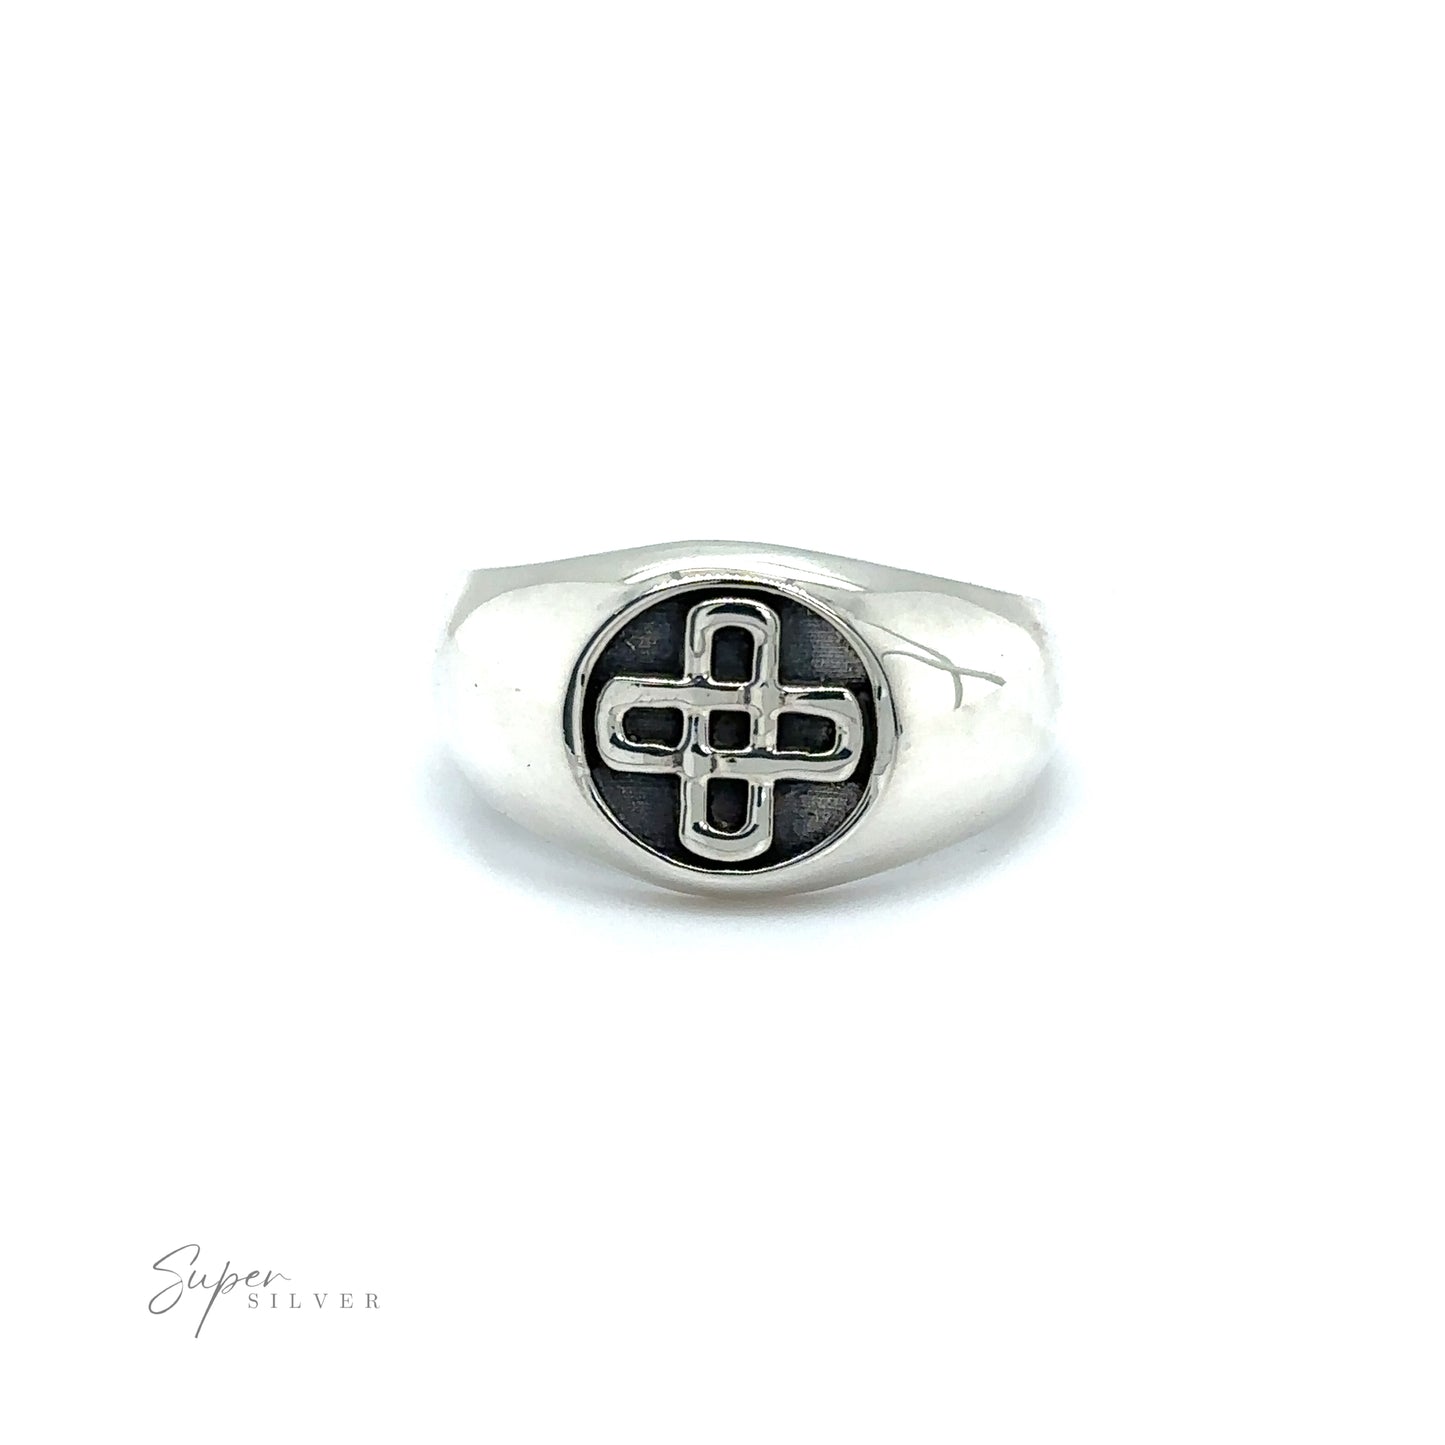 A bold and striking Celtic Solomon's Knot Signet Ring, also known as Solomon's Knot Signet Ring.